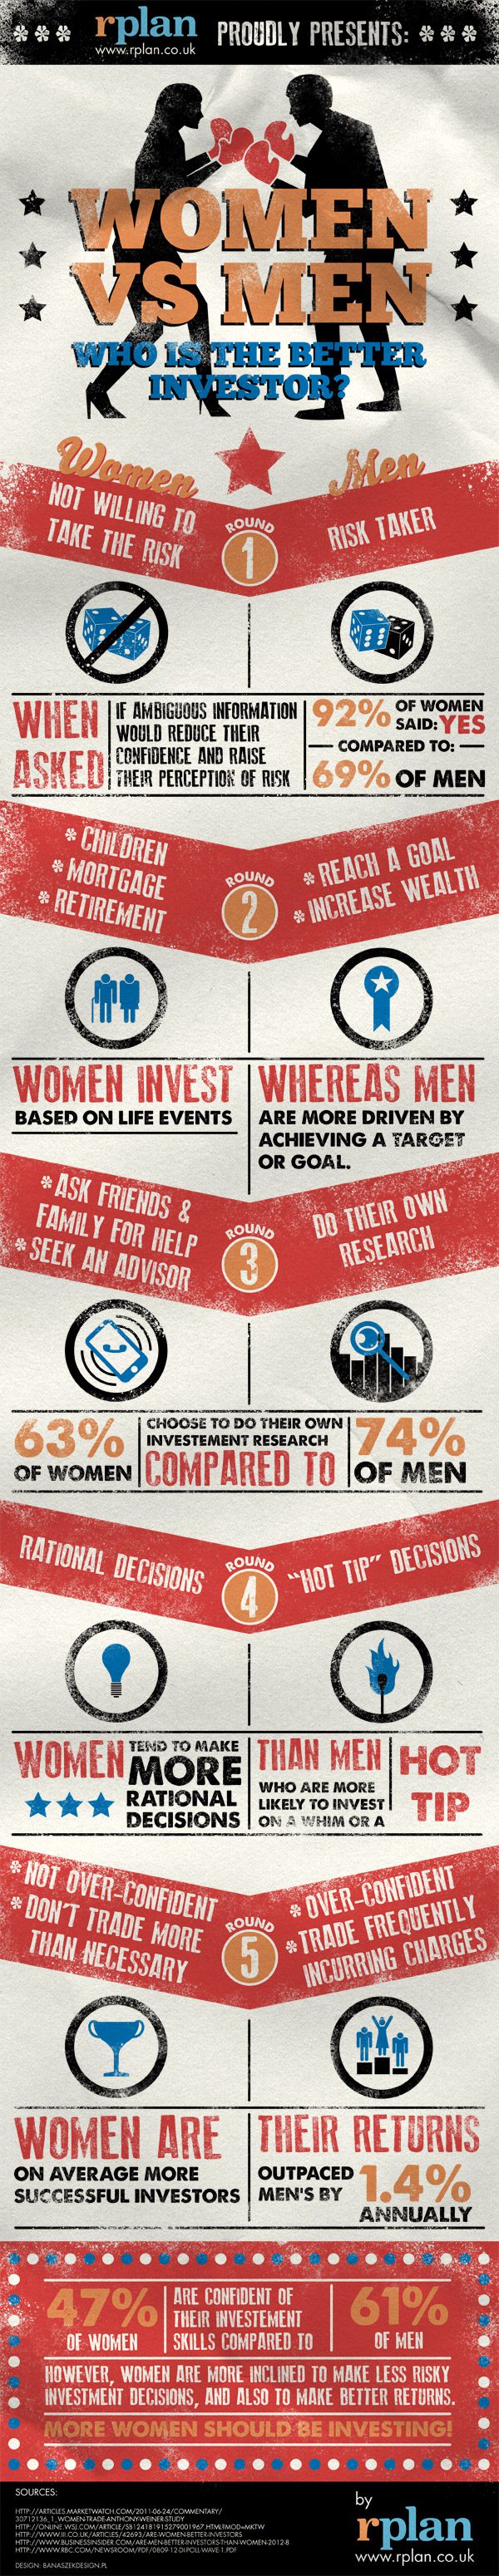 Infographic: Who is the better investor, men or women?